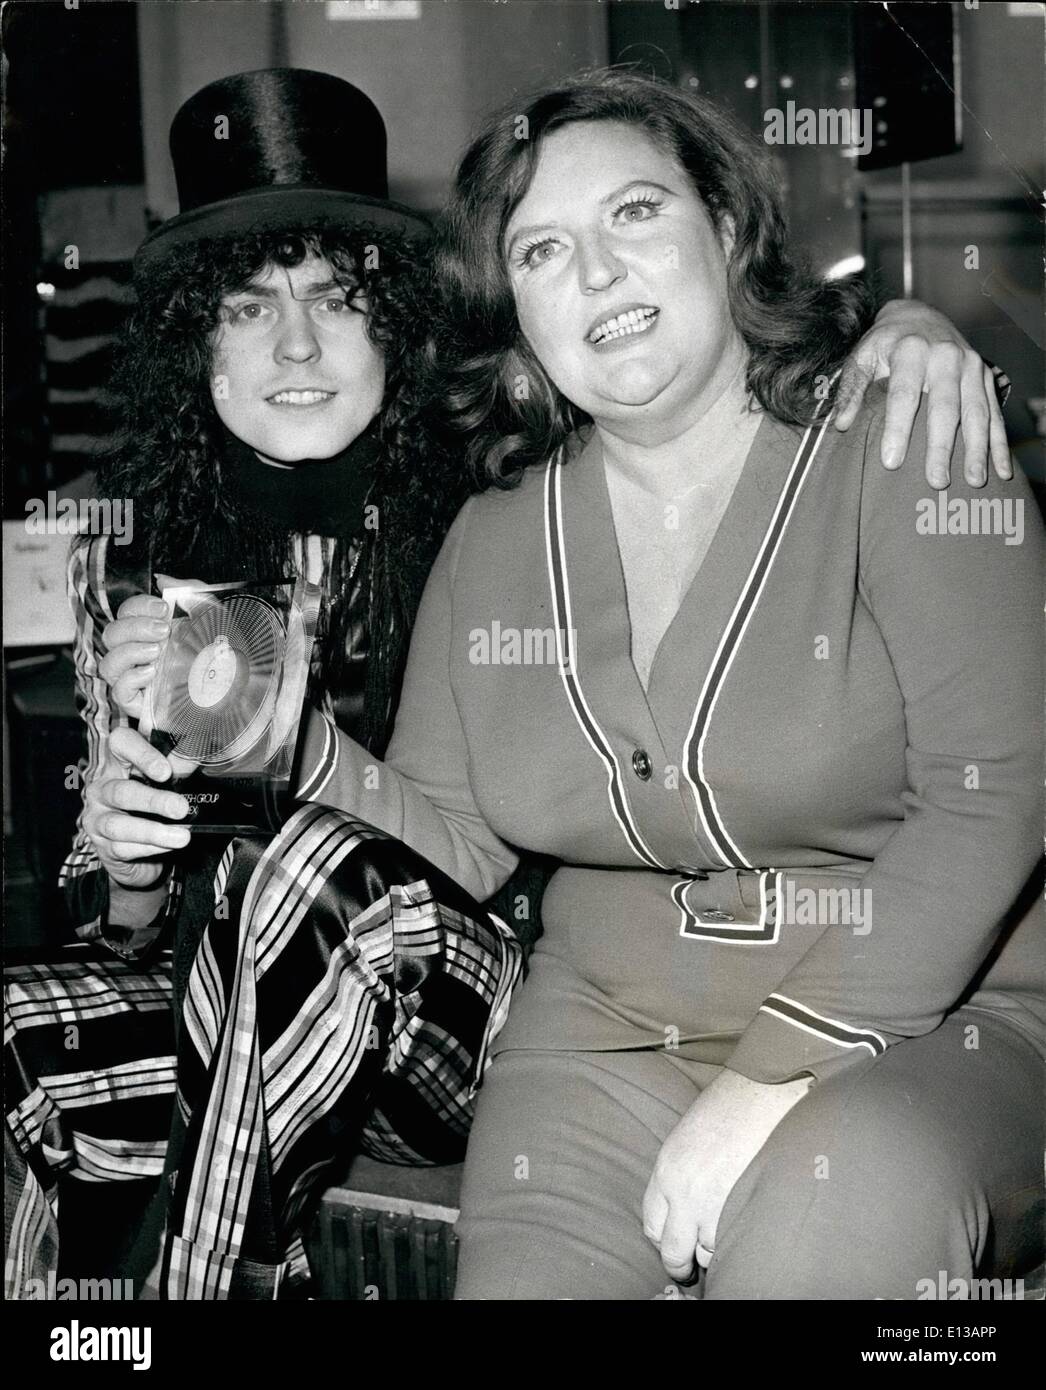 Feb. 29, 2012 - 1972 Disc Music Poll Awards. The 1972 Disc Music Poll Awards were presented today at Hatchetts, Piccadilly. Keystone Photo Shows: Janet Webb, who made the presentations, pictured with Marc Bolan, leader of the top British group, T.Rex. Stock Photo